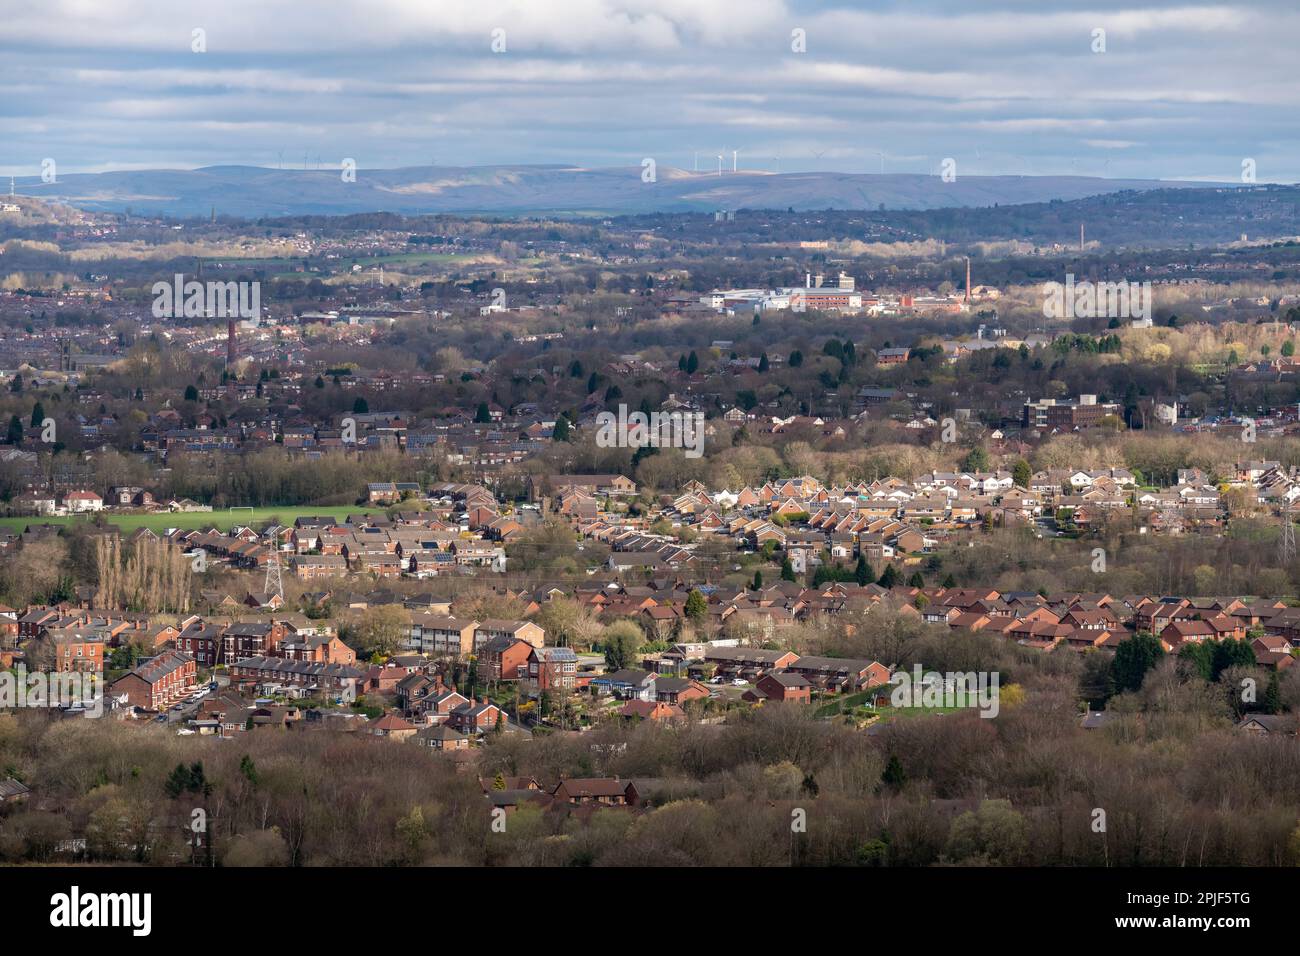 View over the town of Hyde in Greater Manchester, England with wind turbines seen on the moors in the distance. Stock Photo